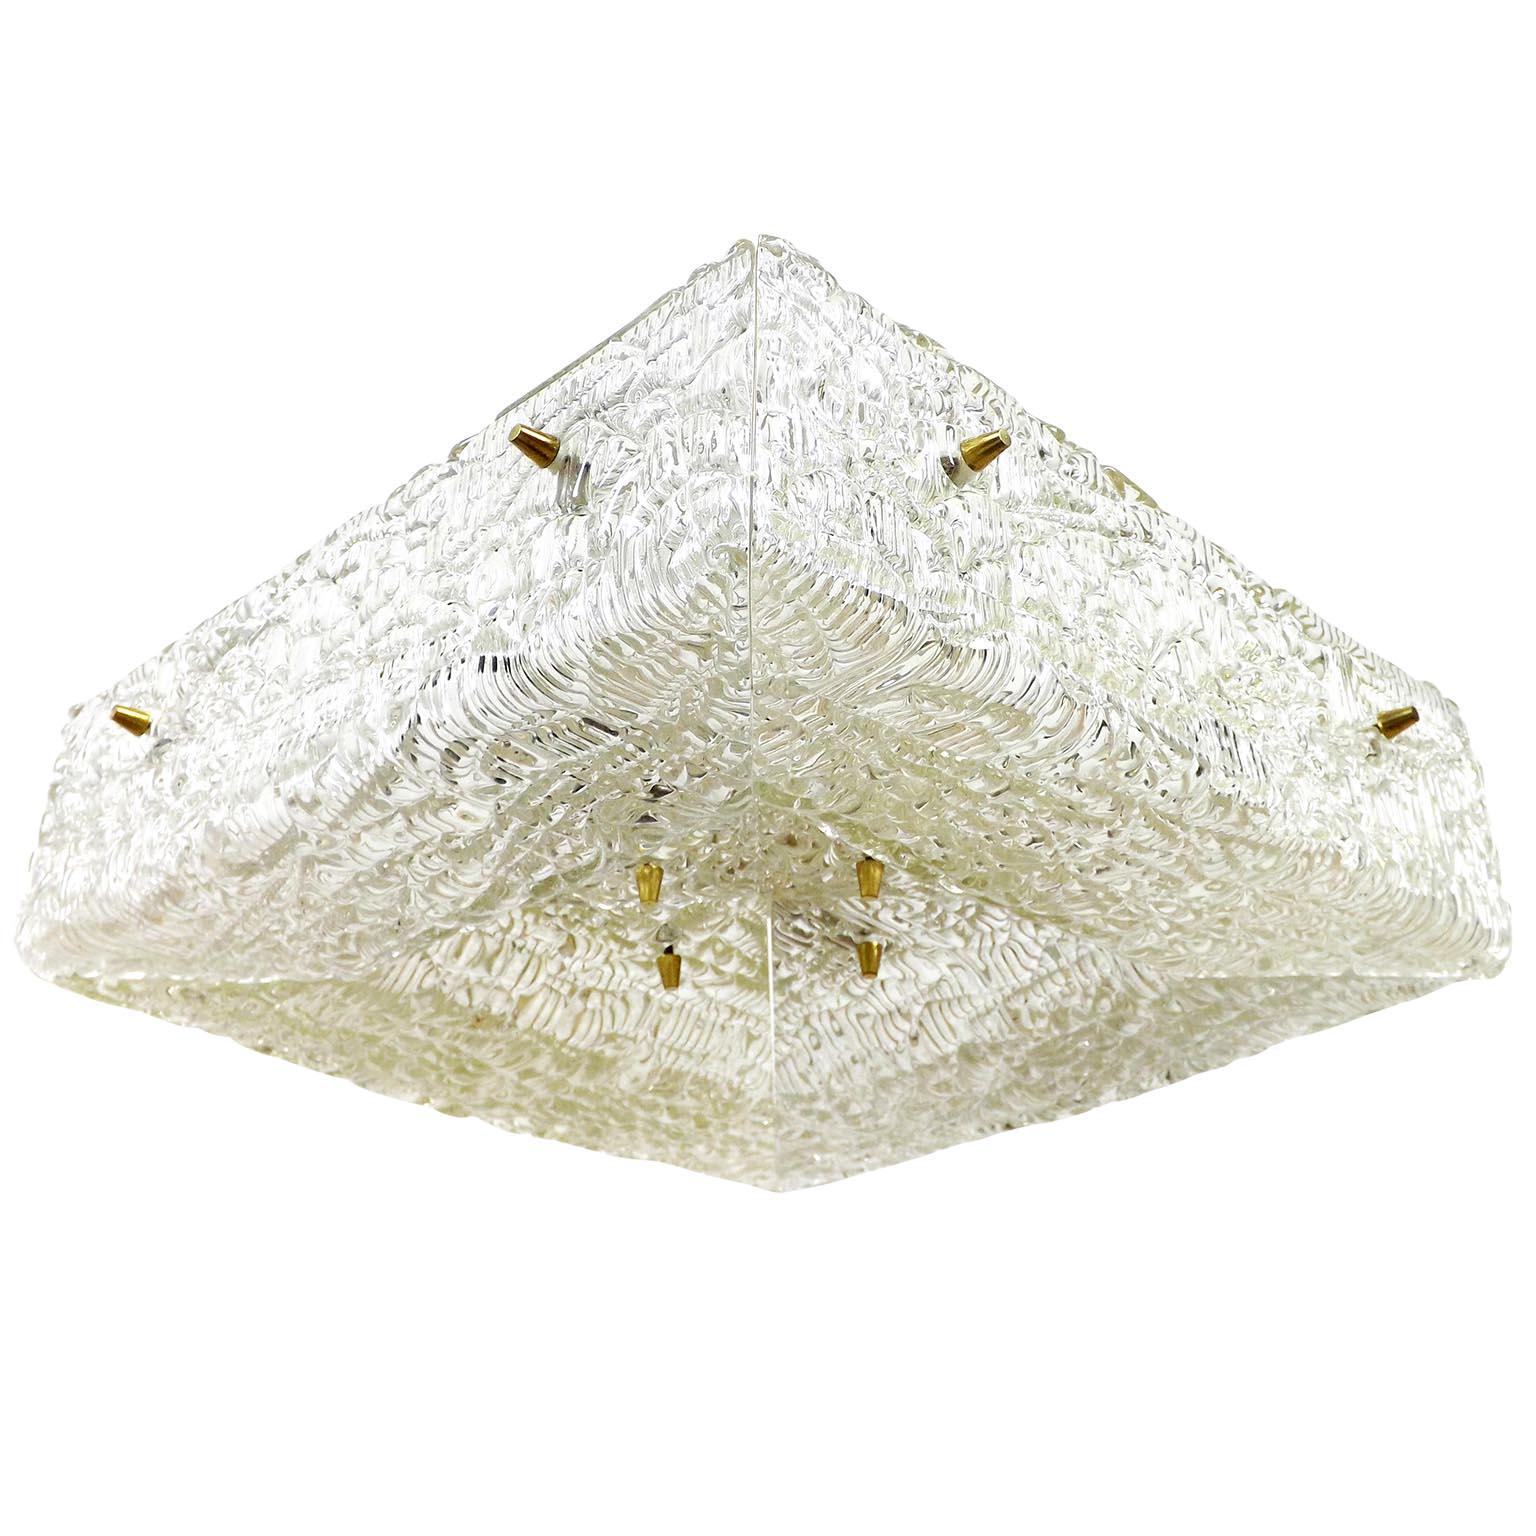 One of four textured glass and brass flush mount lights by J.T. Kalmar, Austria, manufactured in midcentury, circa 1960 (late 1950s or early 1960s).
A square pressed glass with a watery structure is divided into four parts which are mounted with